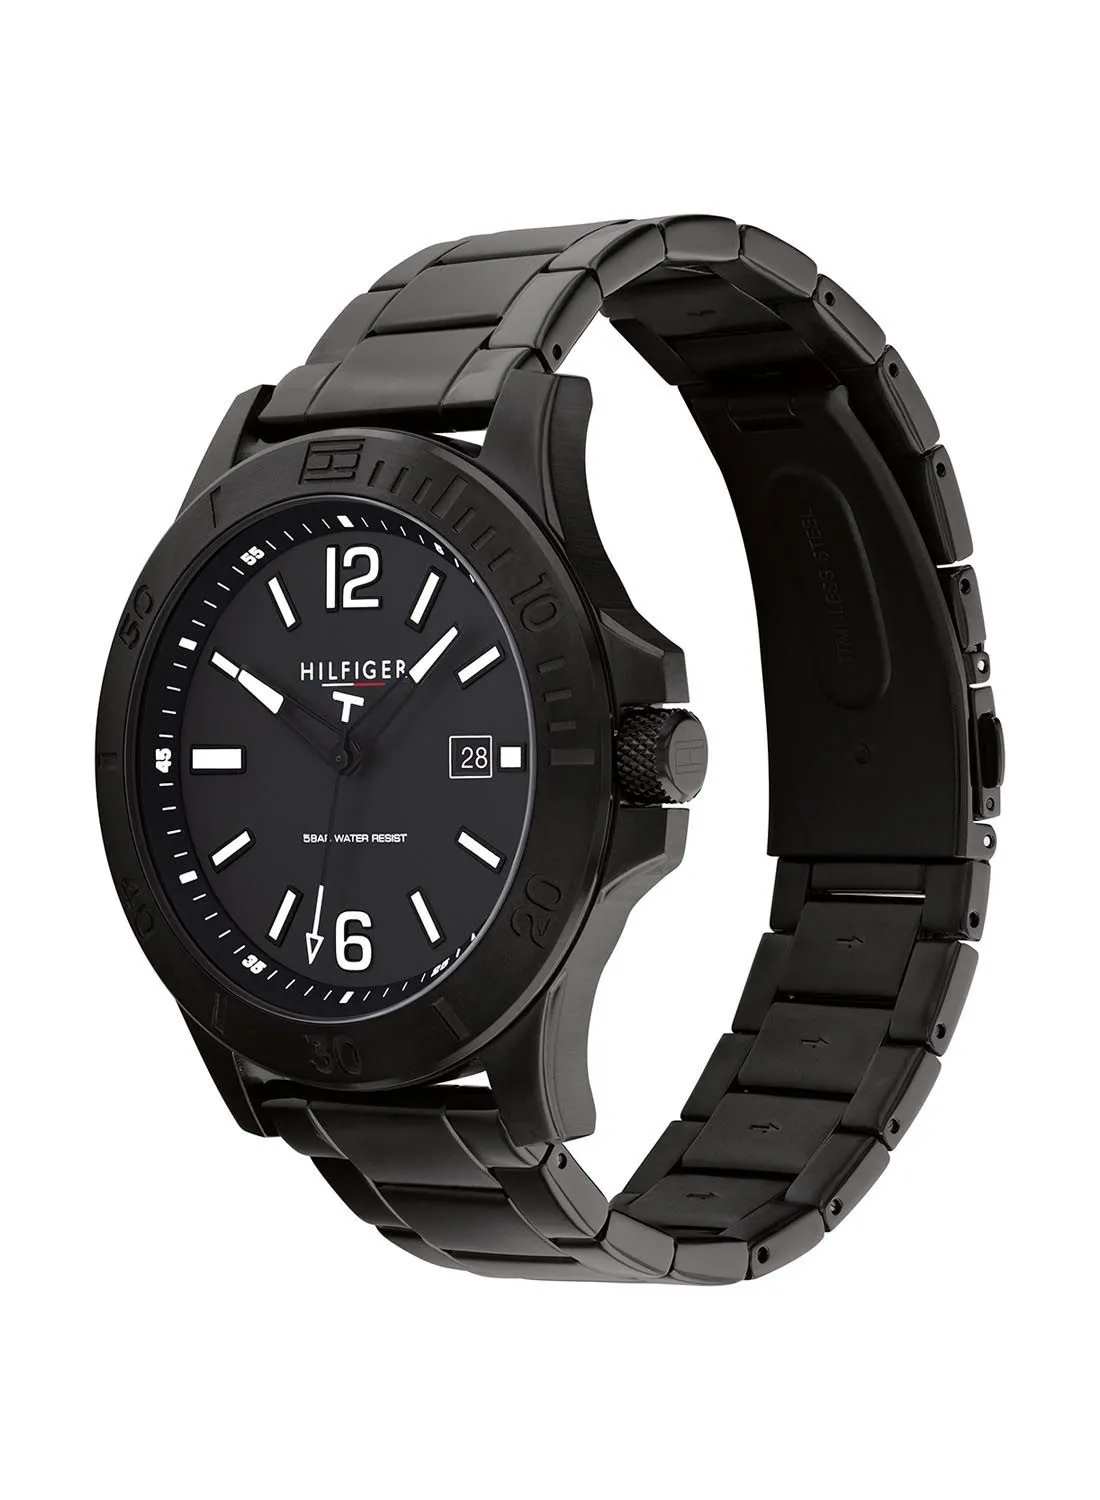 TOMMY HILFIGER TOMMY HILFIGER RYAN MEN's BLACK DIAL, IONIC PLATED BLACK STEEL WATCH - 1791996